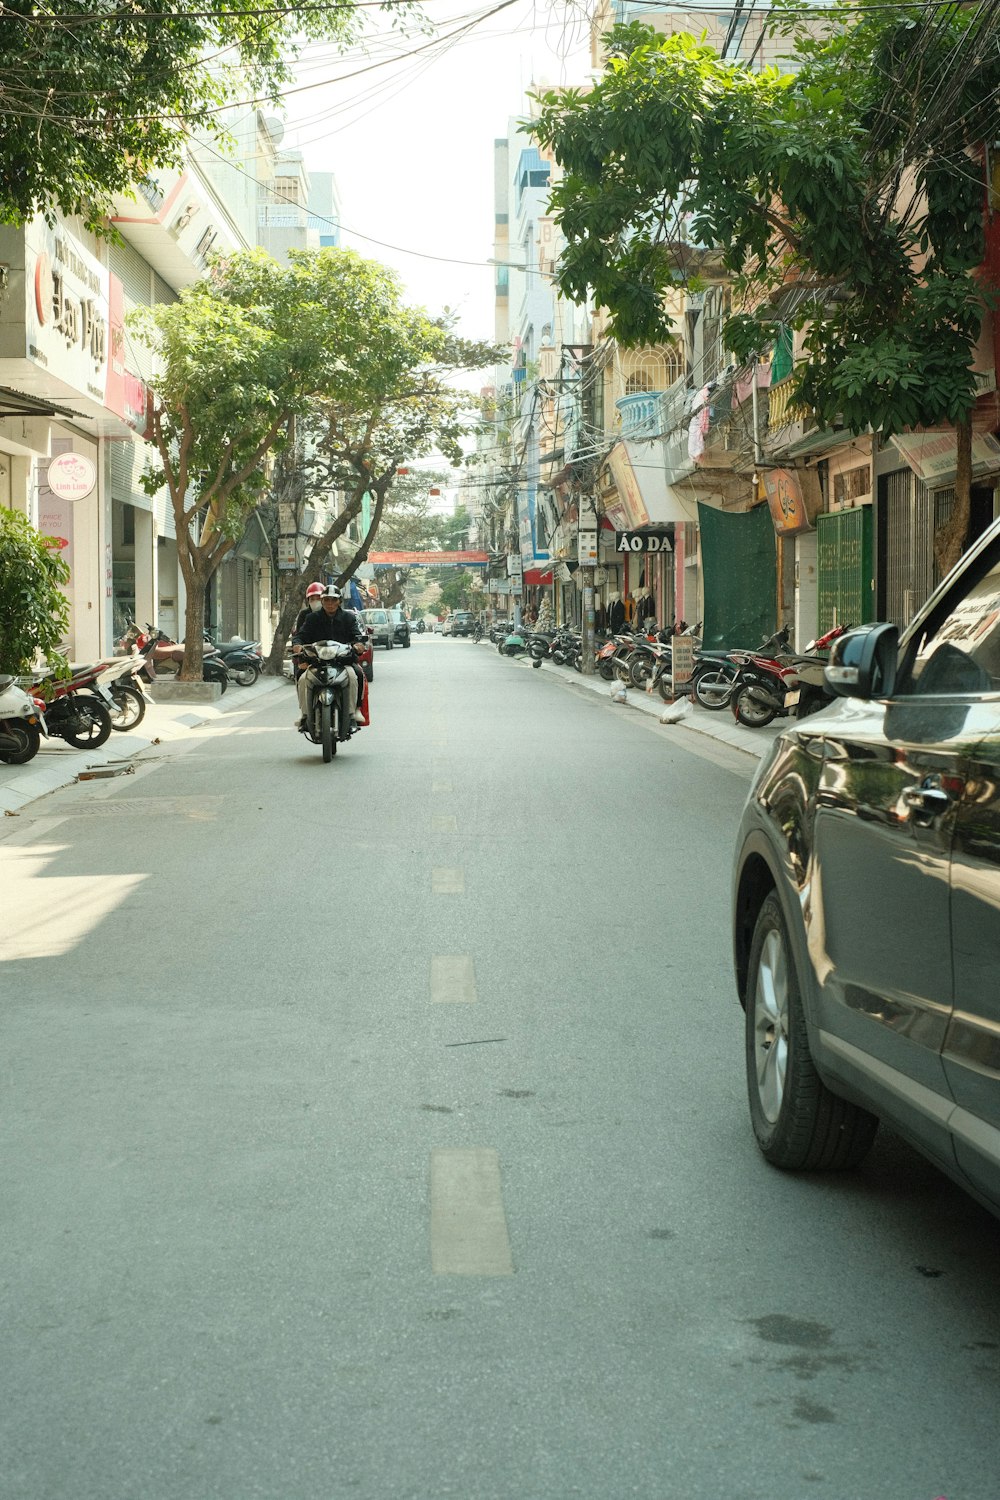 a motorcyclist rides down a street lined with parked cars